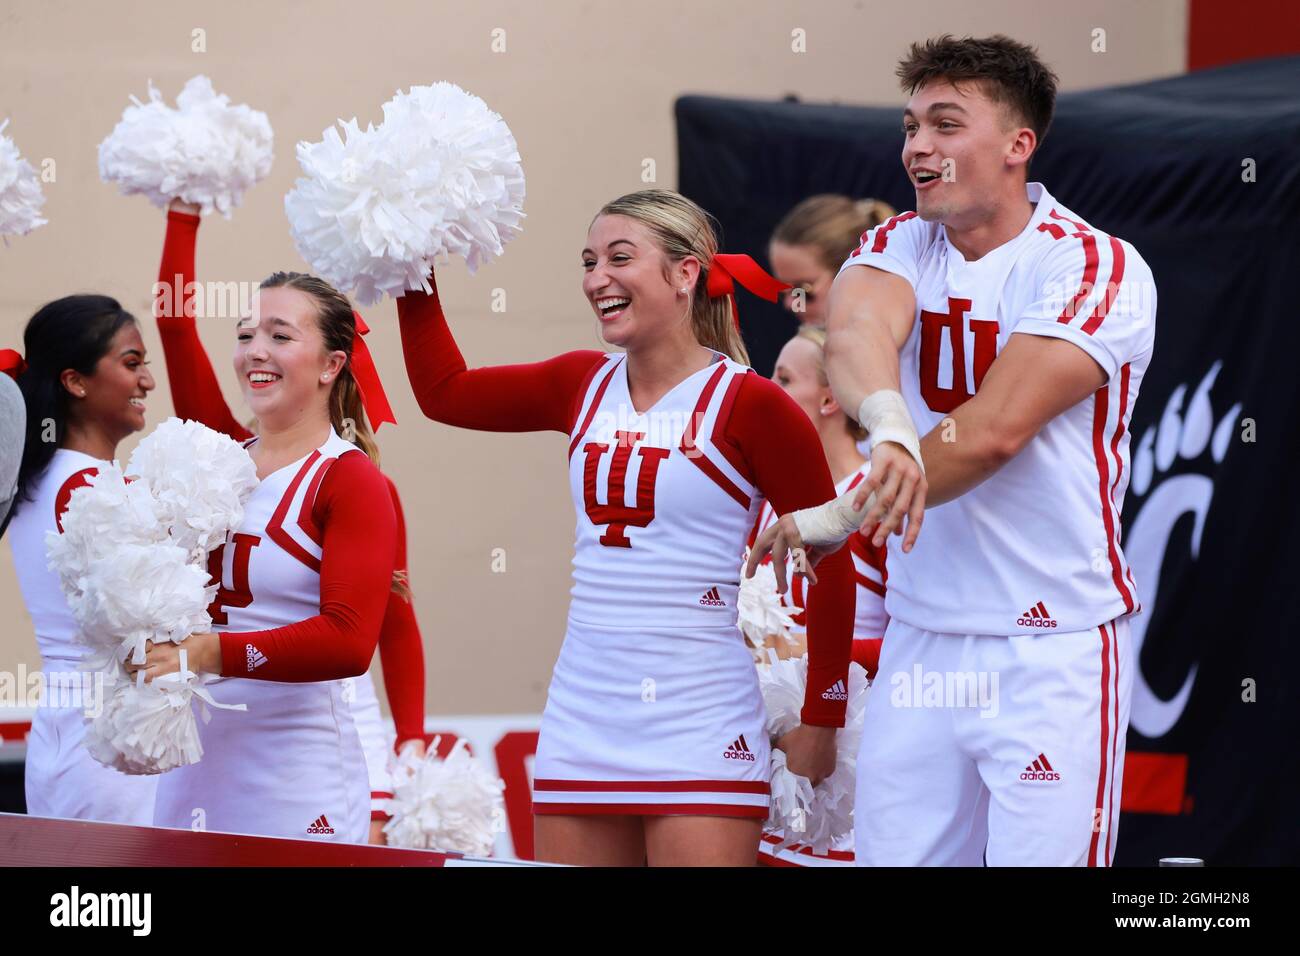 Bloomington, United States. 18th Sep, 2021. Indiana University cheerleaders cheer after the Hoosiers scored a touchdown against University of Cincinnati during an NCAA football game at Memorial Stadium. IU lost to Cincinnati 38-24. Credit: SOPA Images Limited/Alamy Live News Stock Photo